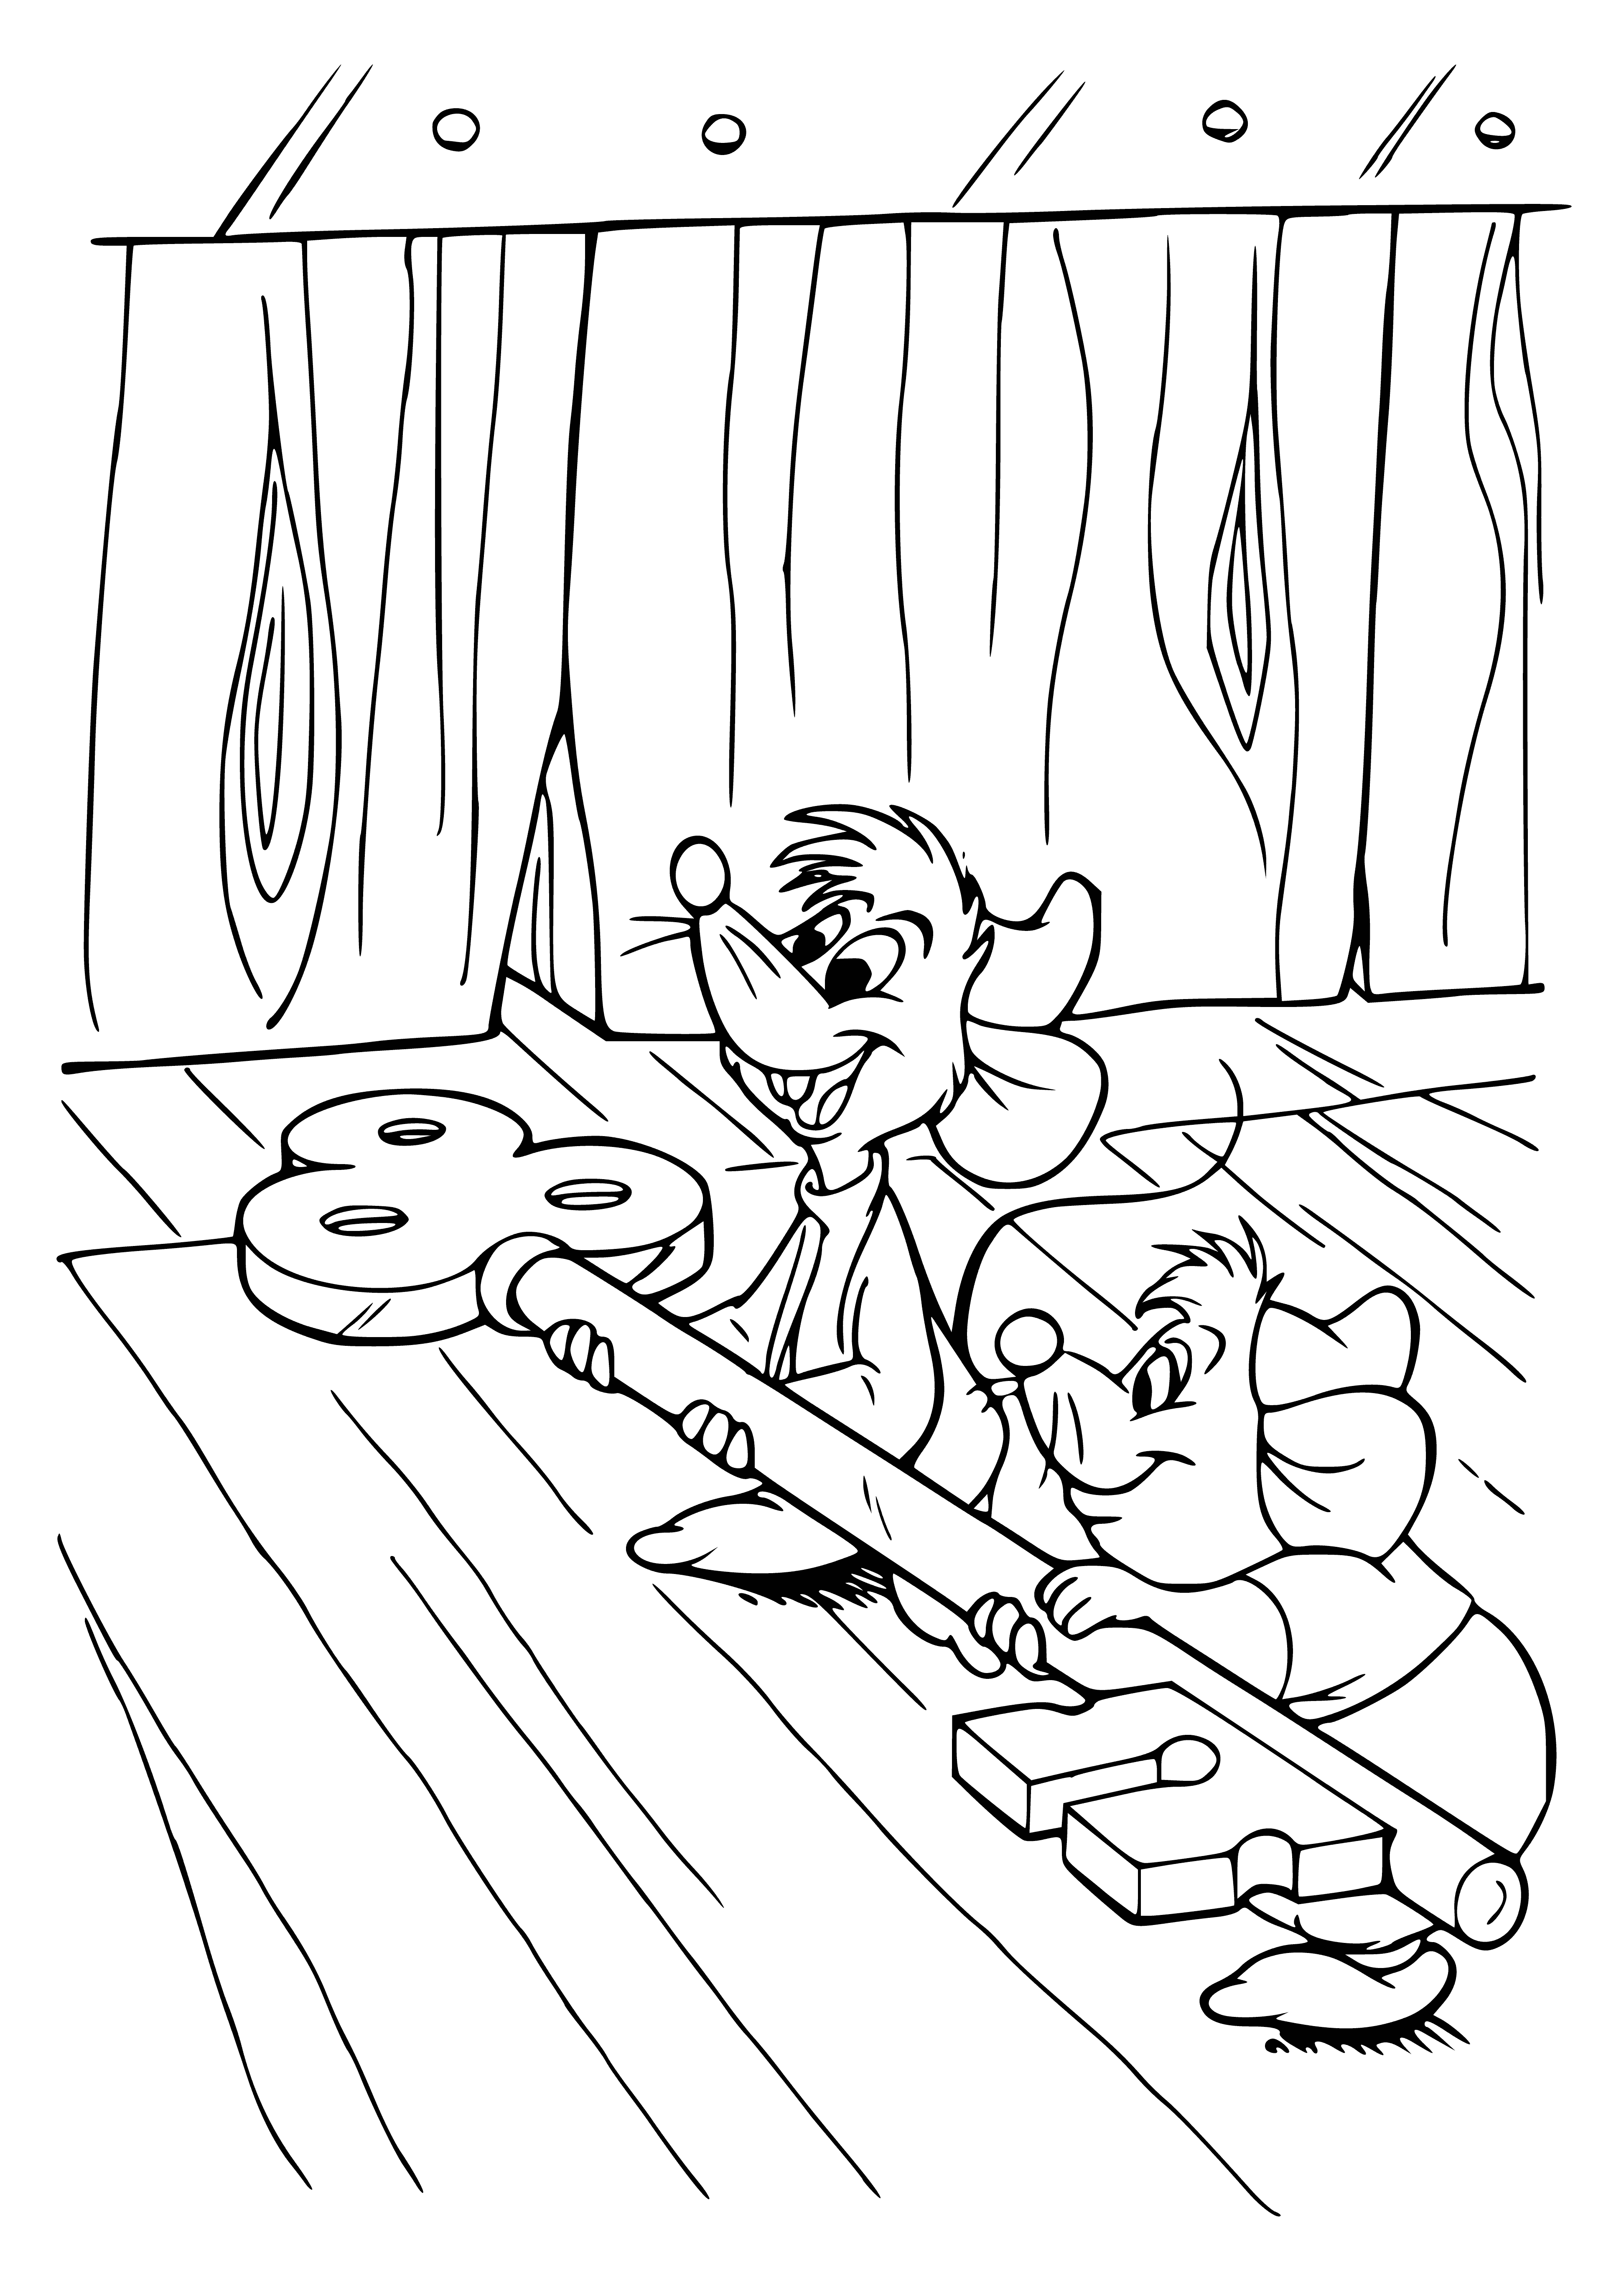 coloring page: Five mice rescue Cinderella from her cell. Two tug her chains while three open the door.